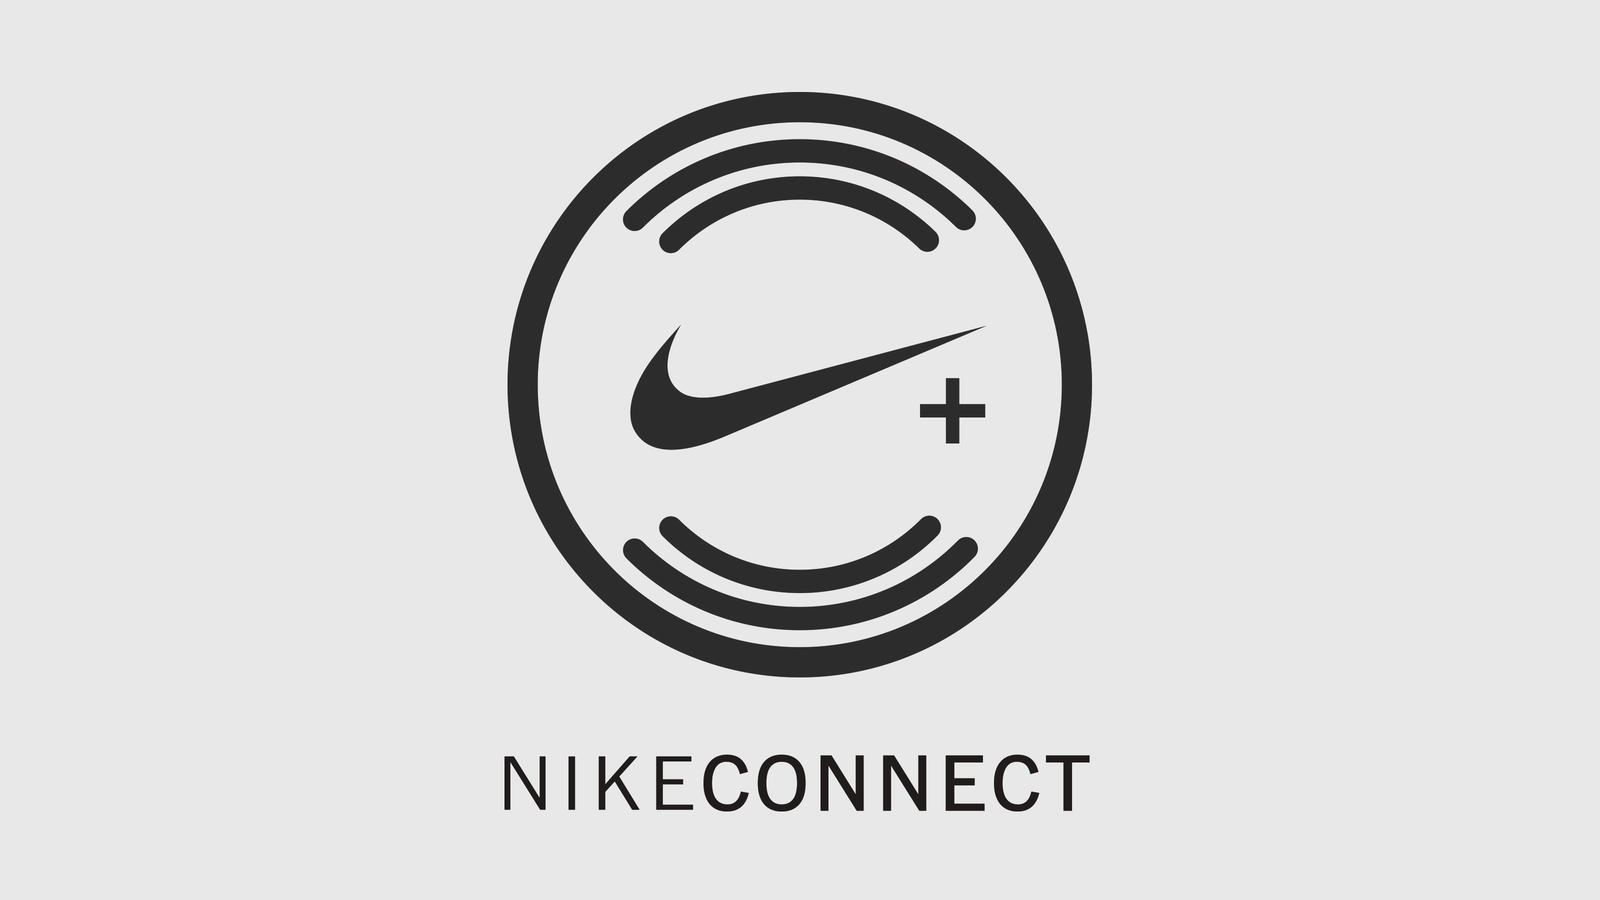 nikeconnect gear